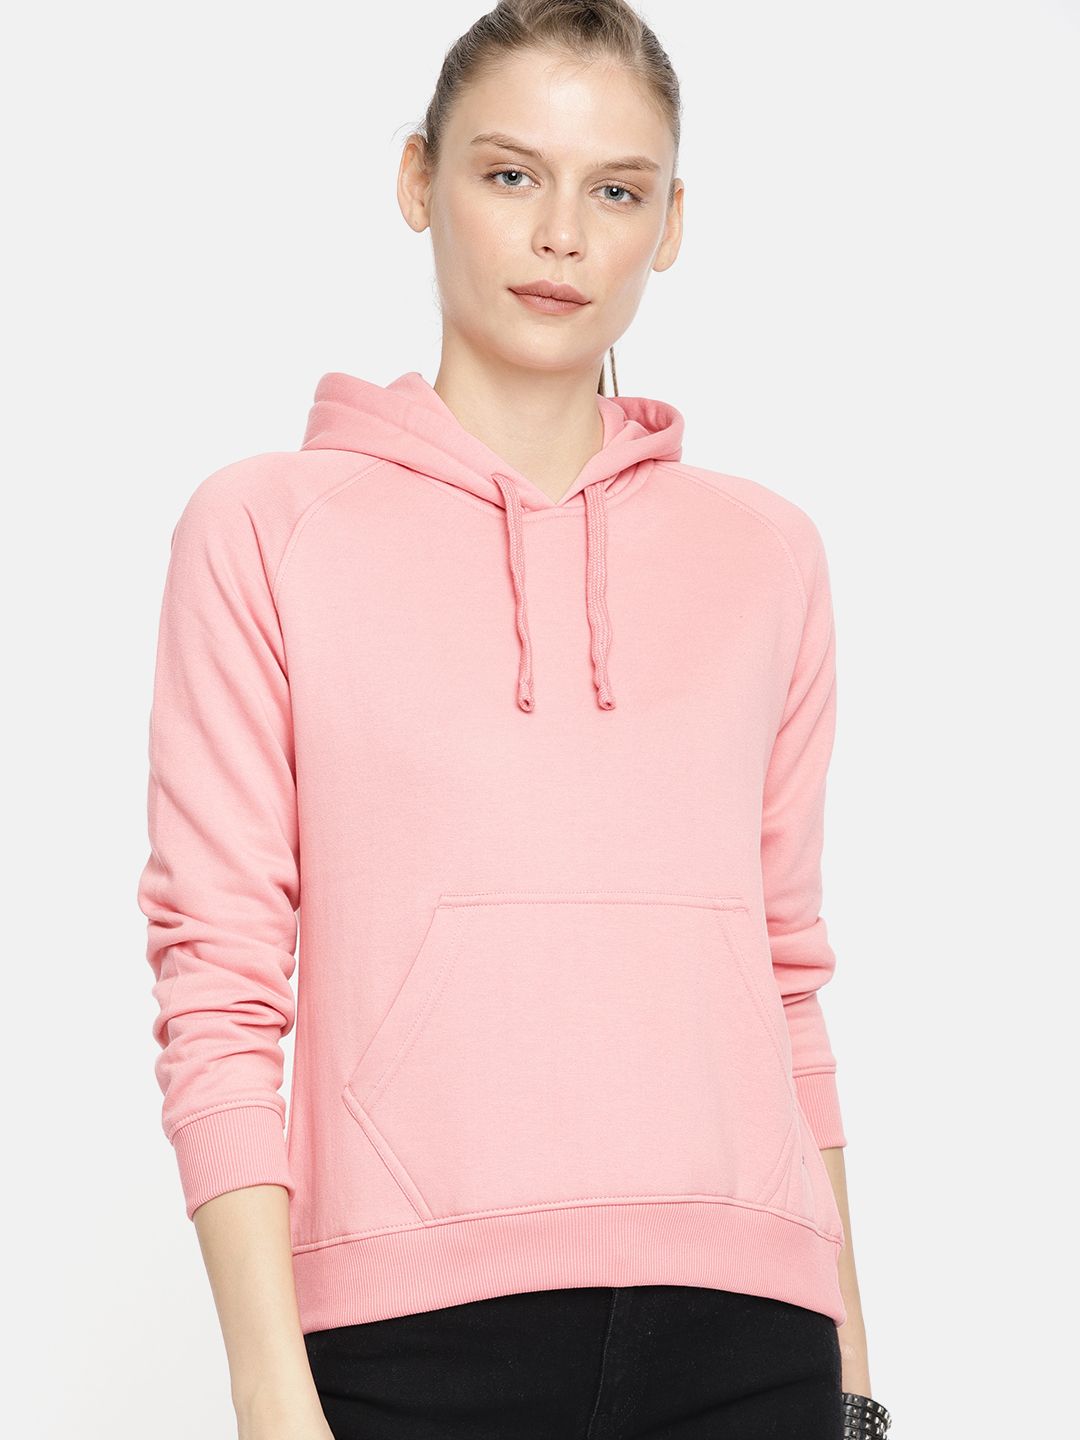 The Roadster Lifestyle Co Women Pink Solid Hooded Sweatshirt Price in India